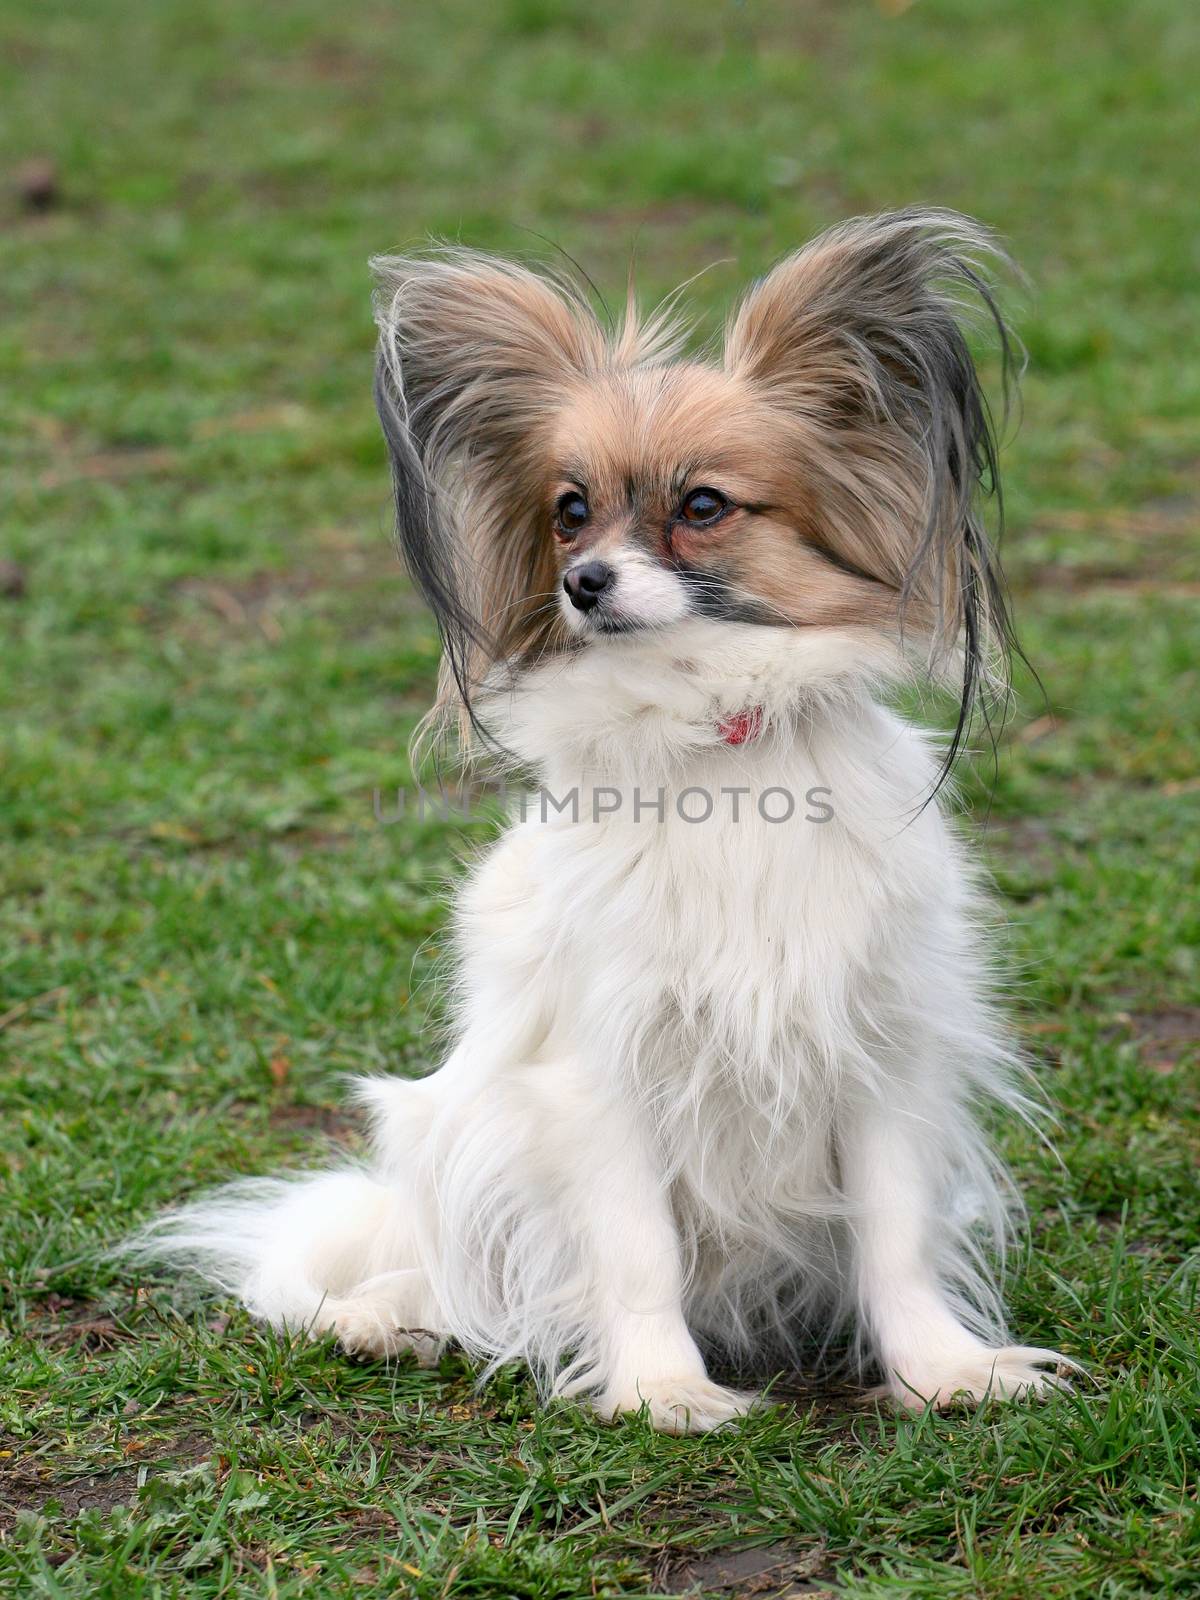 Typical Young Papillon dog in the garden by CaptureLight